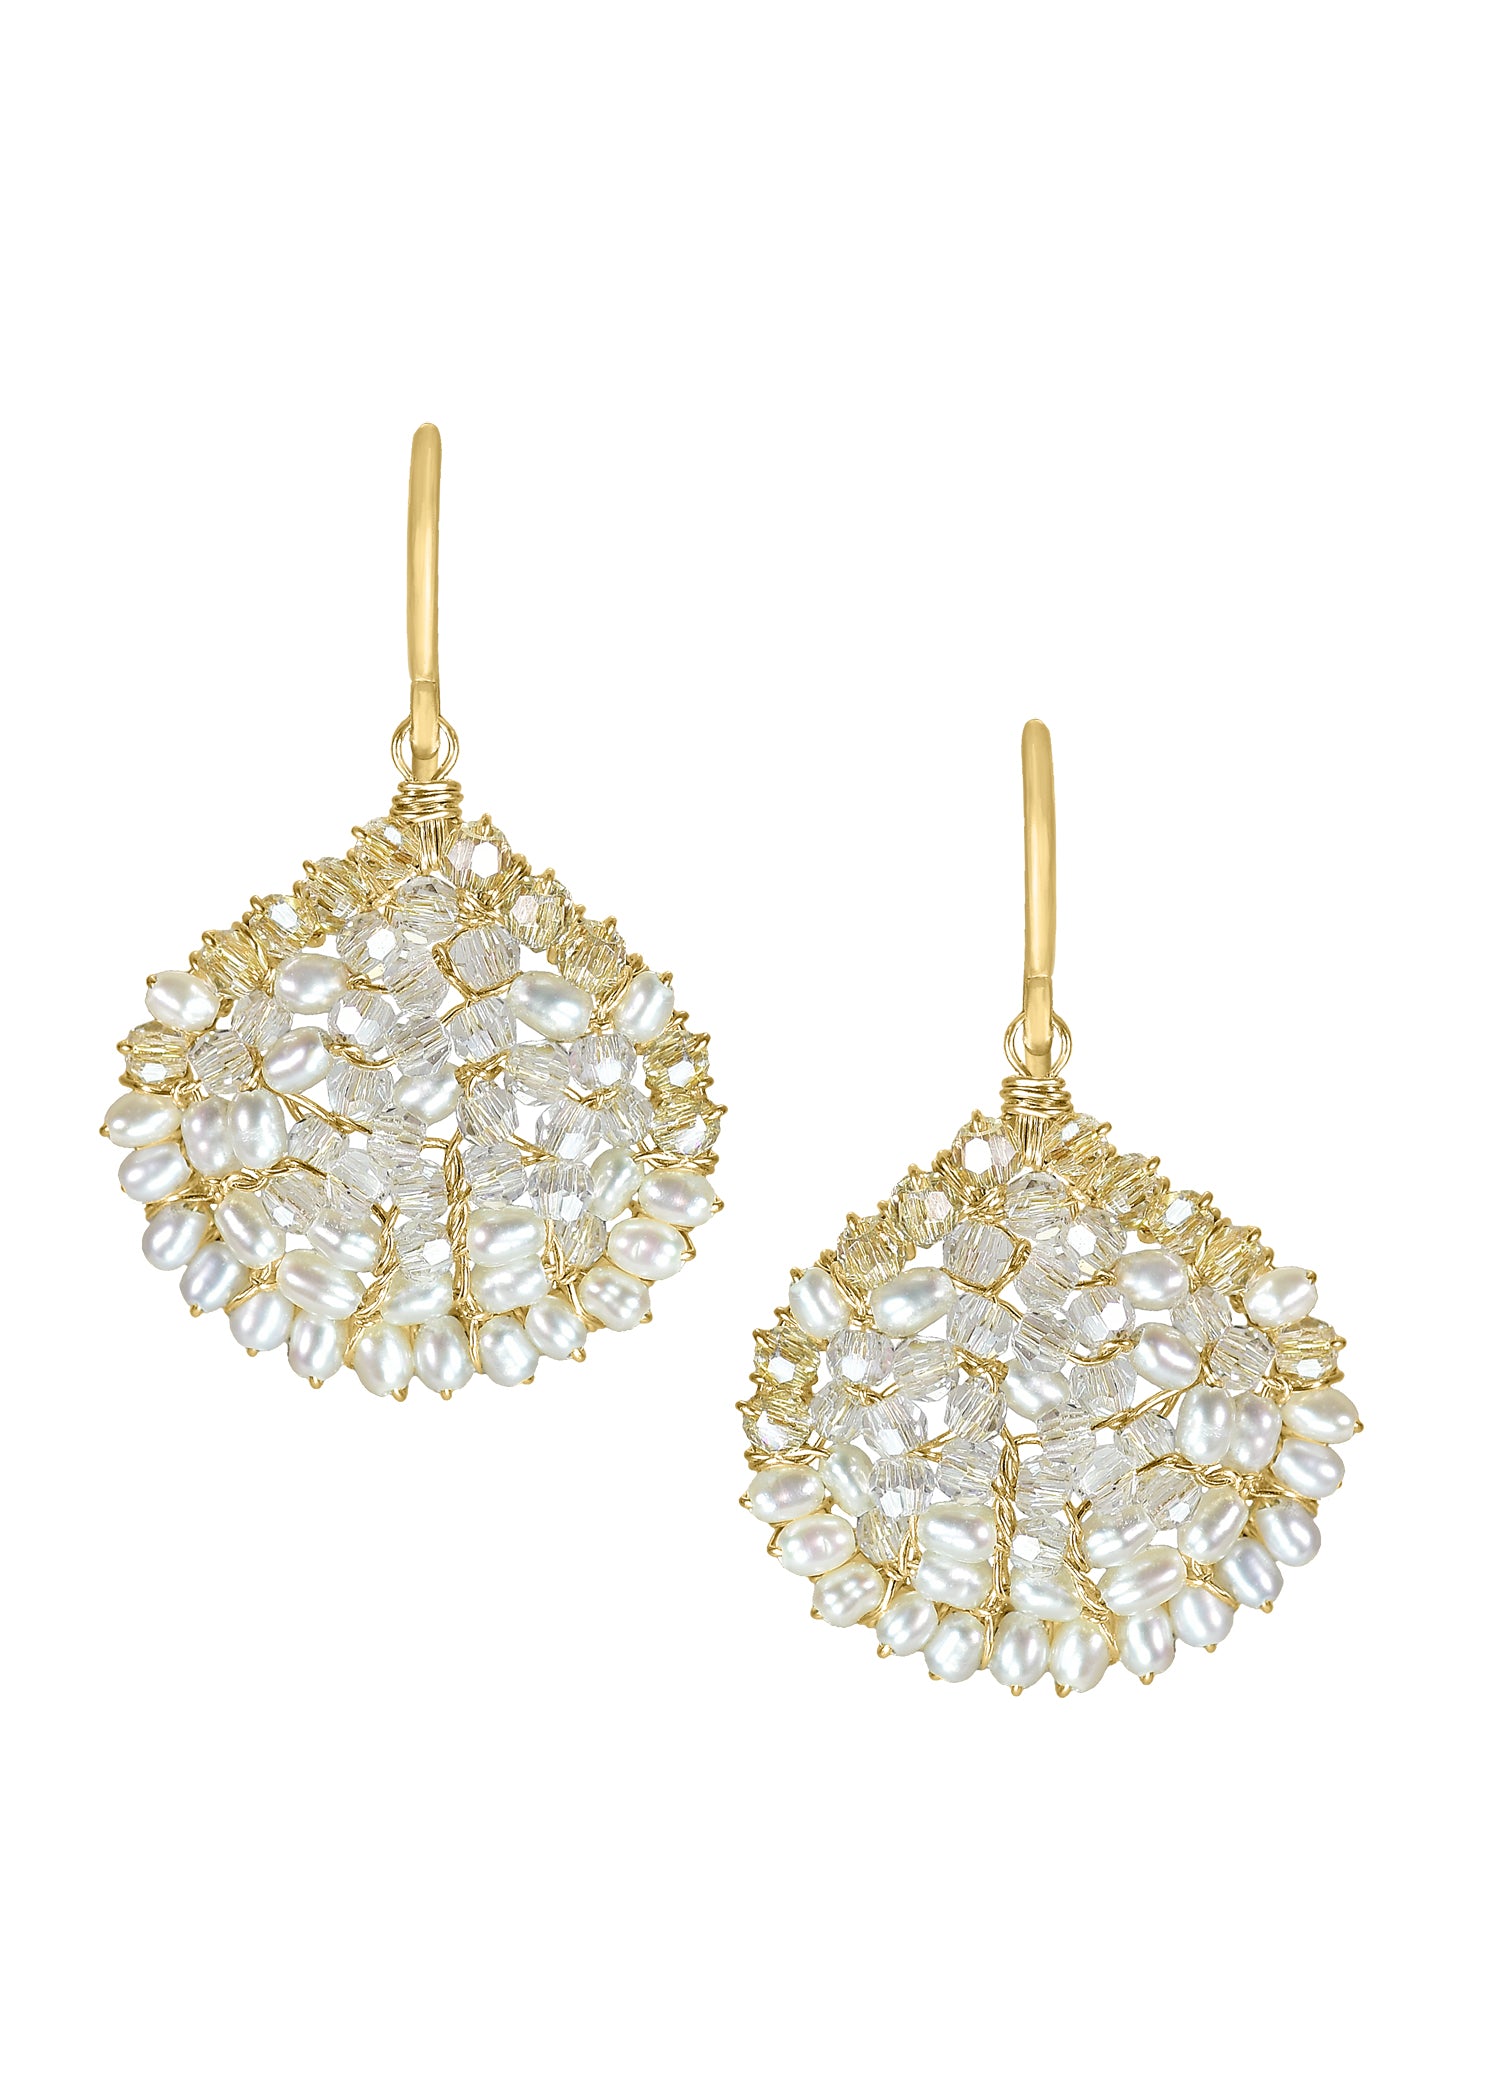 Crystal Freshwater pearl 14k gold fill Earrings measure 1-1/8" in length (including the ear wires) and 5/8" in width at the widest point Handmade in our Los Angeles studio